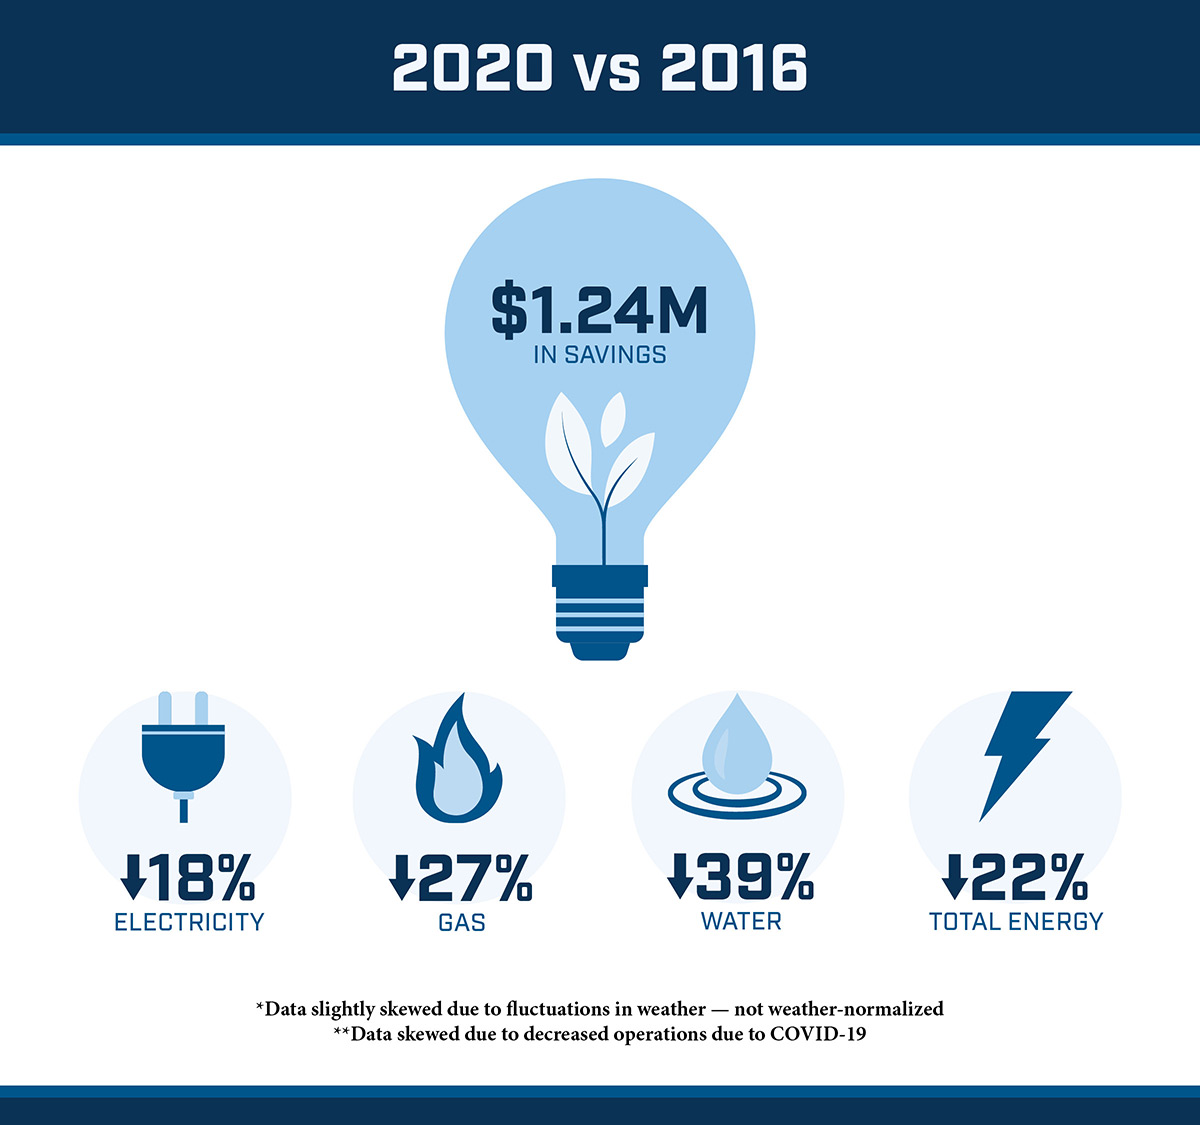 An infographic showing that between 2016 and 2020, the University saved 1.24 million dollars in energy costs. Electricity costs are down 18 percent. Gas down 27 percent. Water down 39 percent. Total energy down 22 percent. A note indicates that data can be skewed slightly because of fluctuations in weather and decreased operations due to COVID-19.